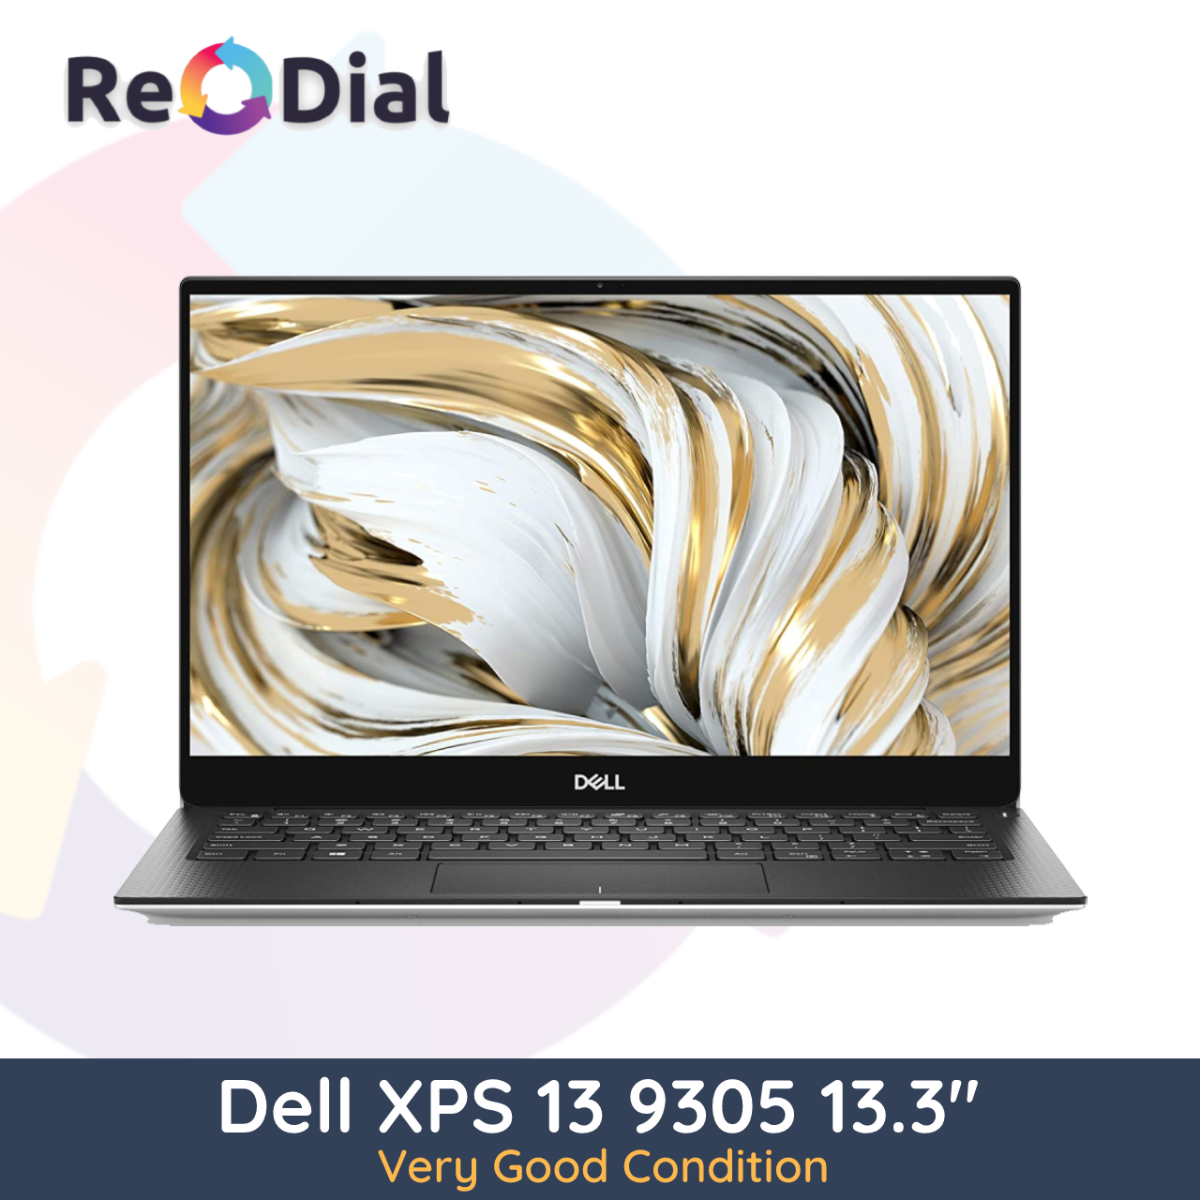 Dell XPS 13 9305 13.3" i7-1165G7 512Gb 16Gb  - Very Good Condition